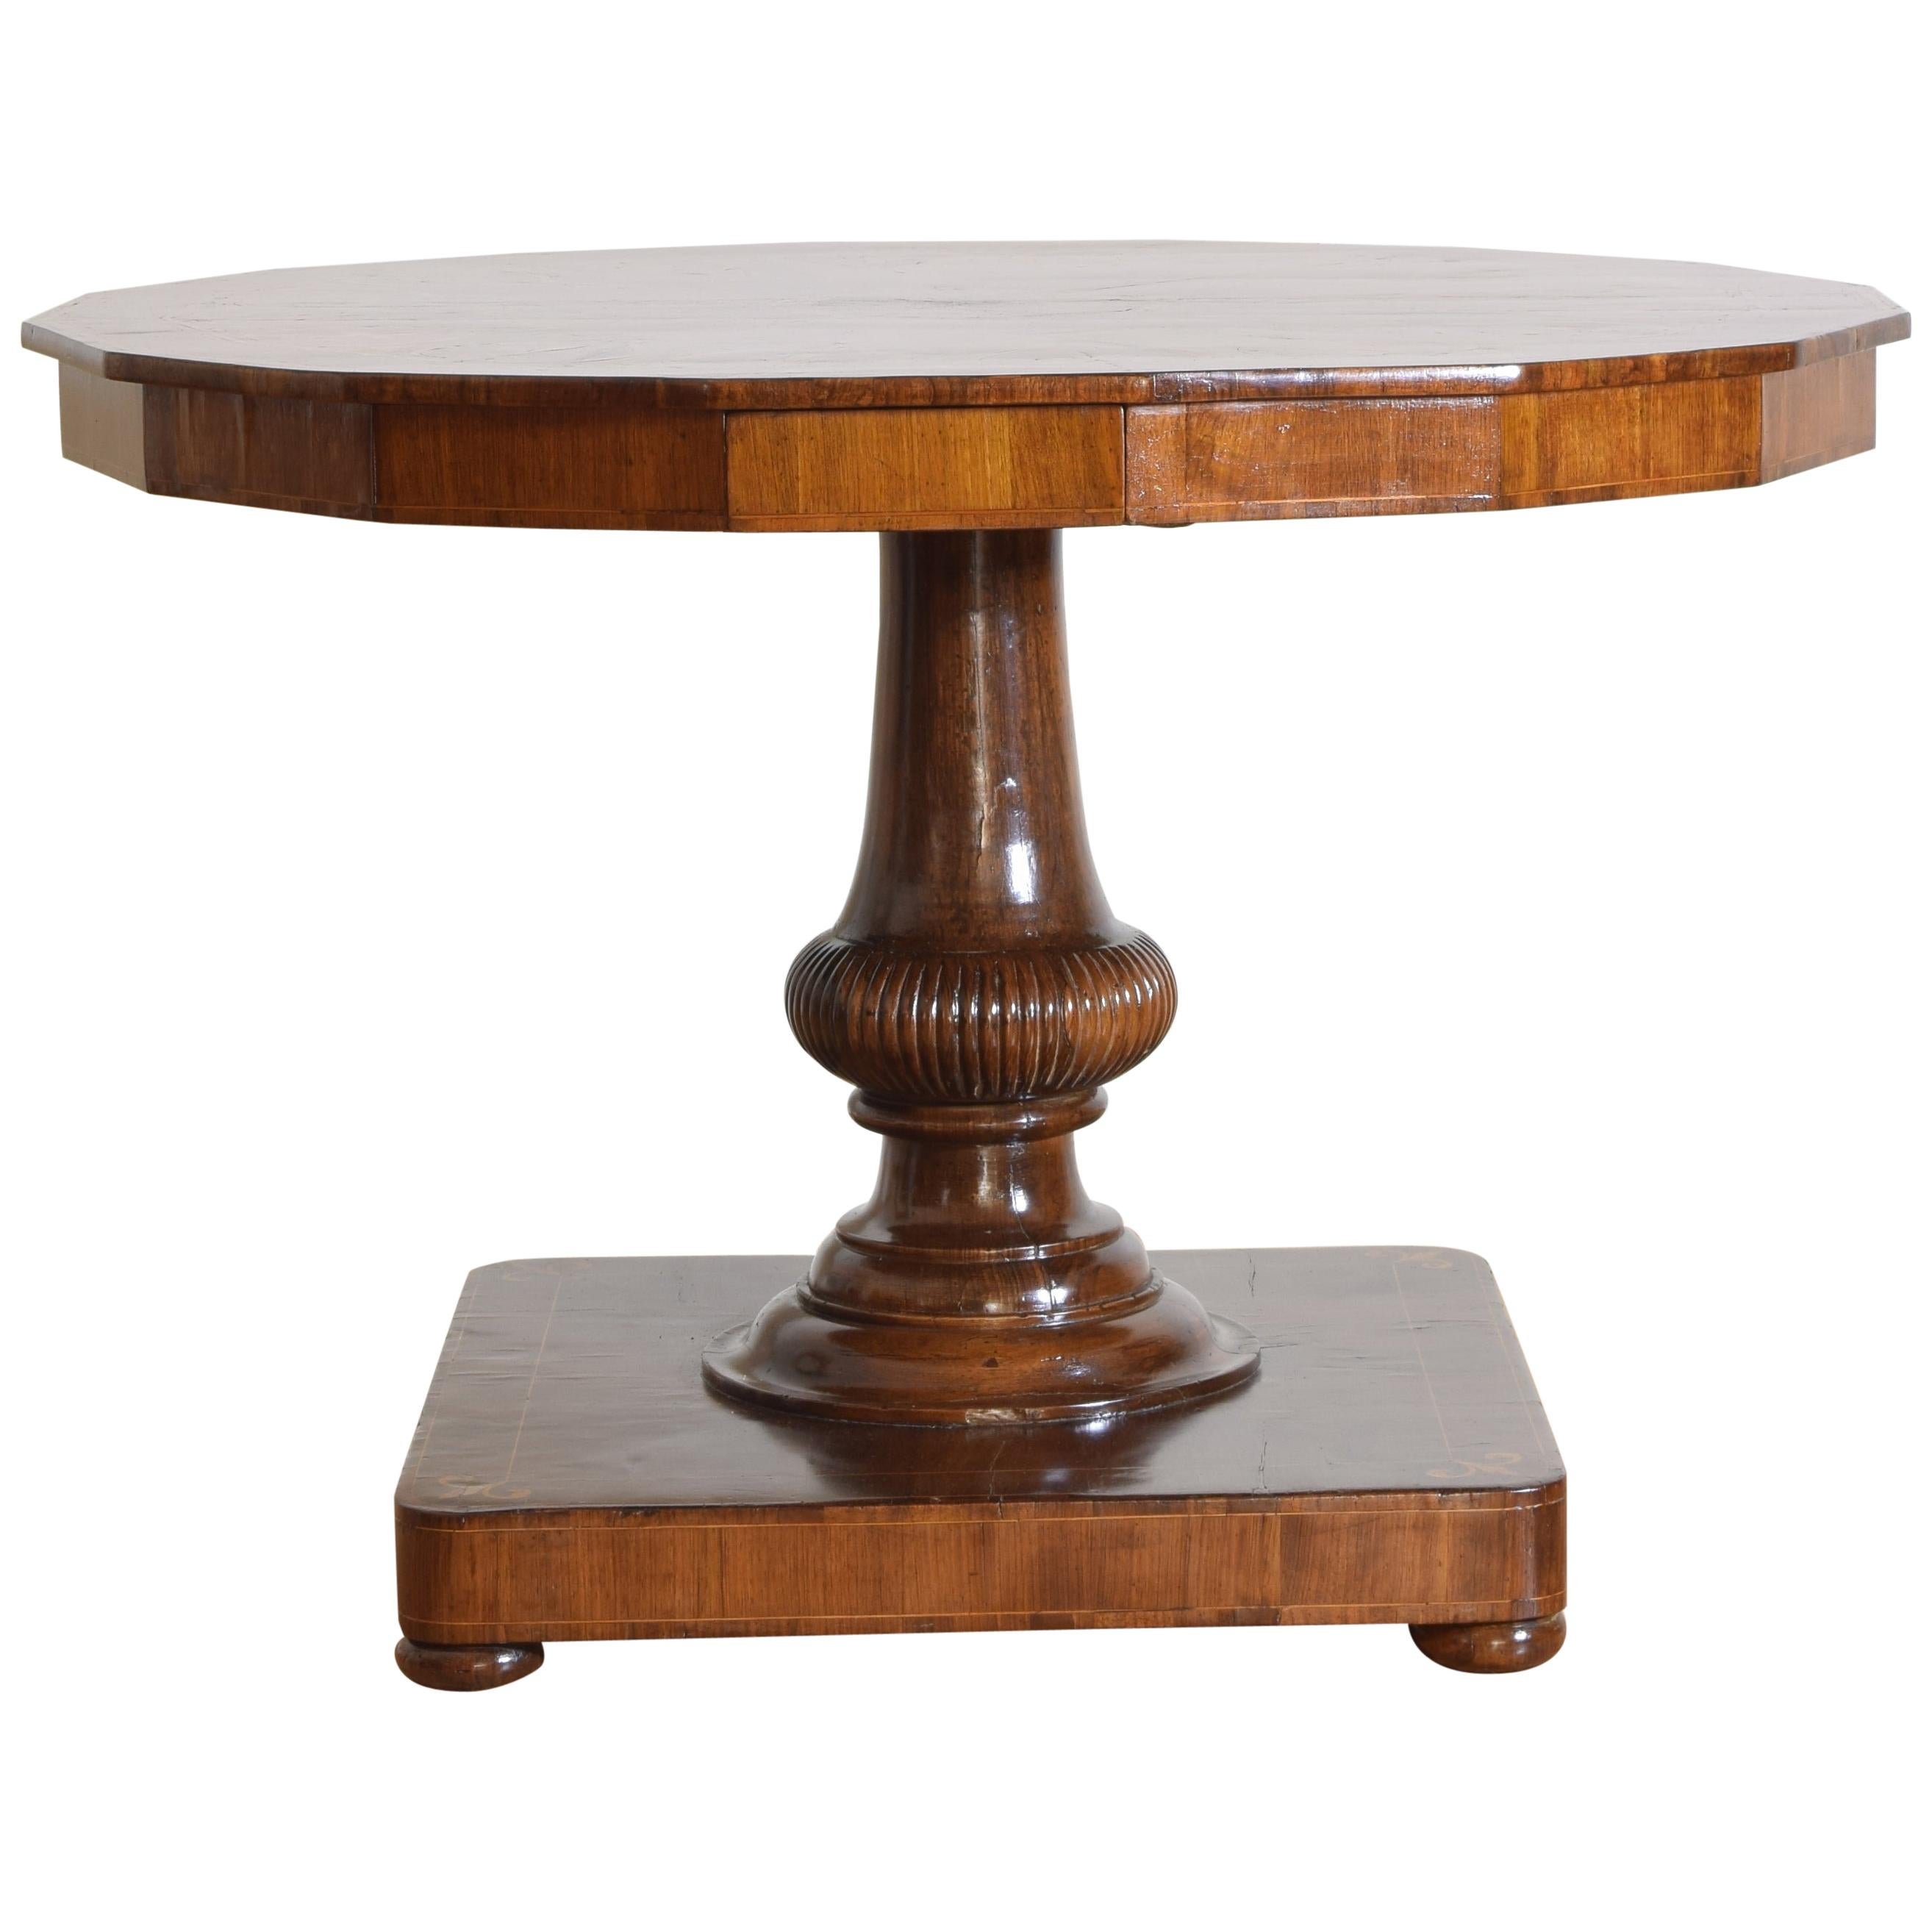 Italian Walnut and Fruitwood Inlaid Center Table, Early 19th Century